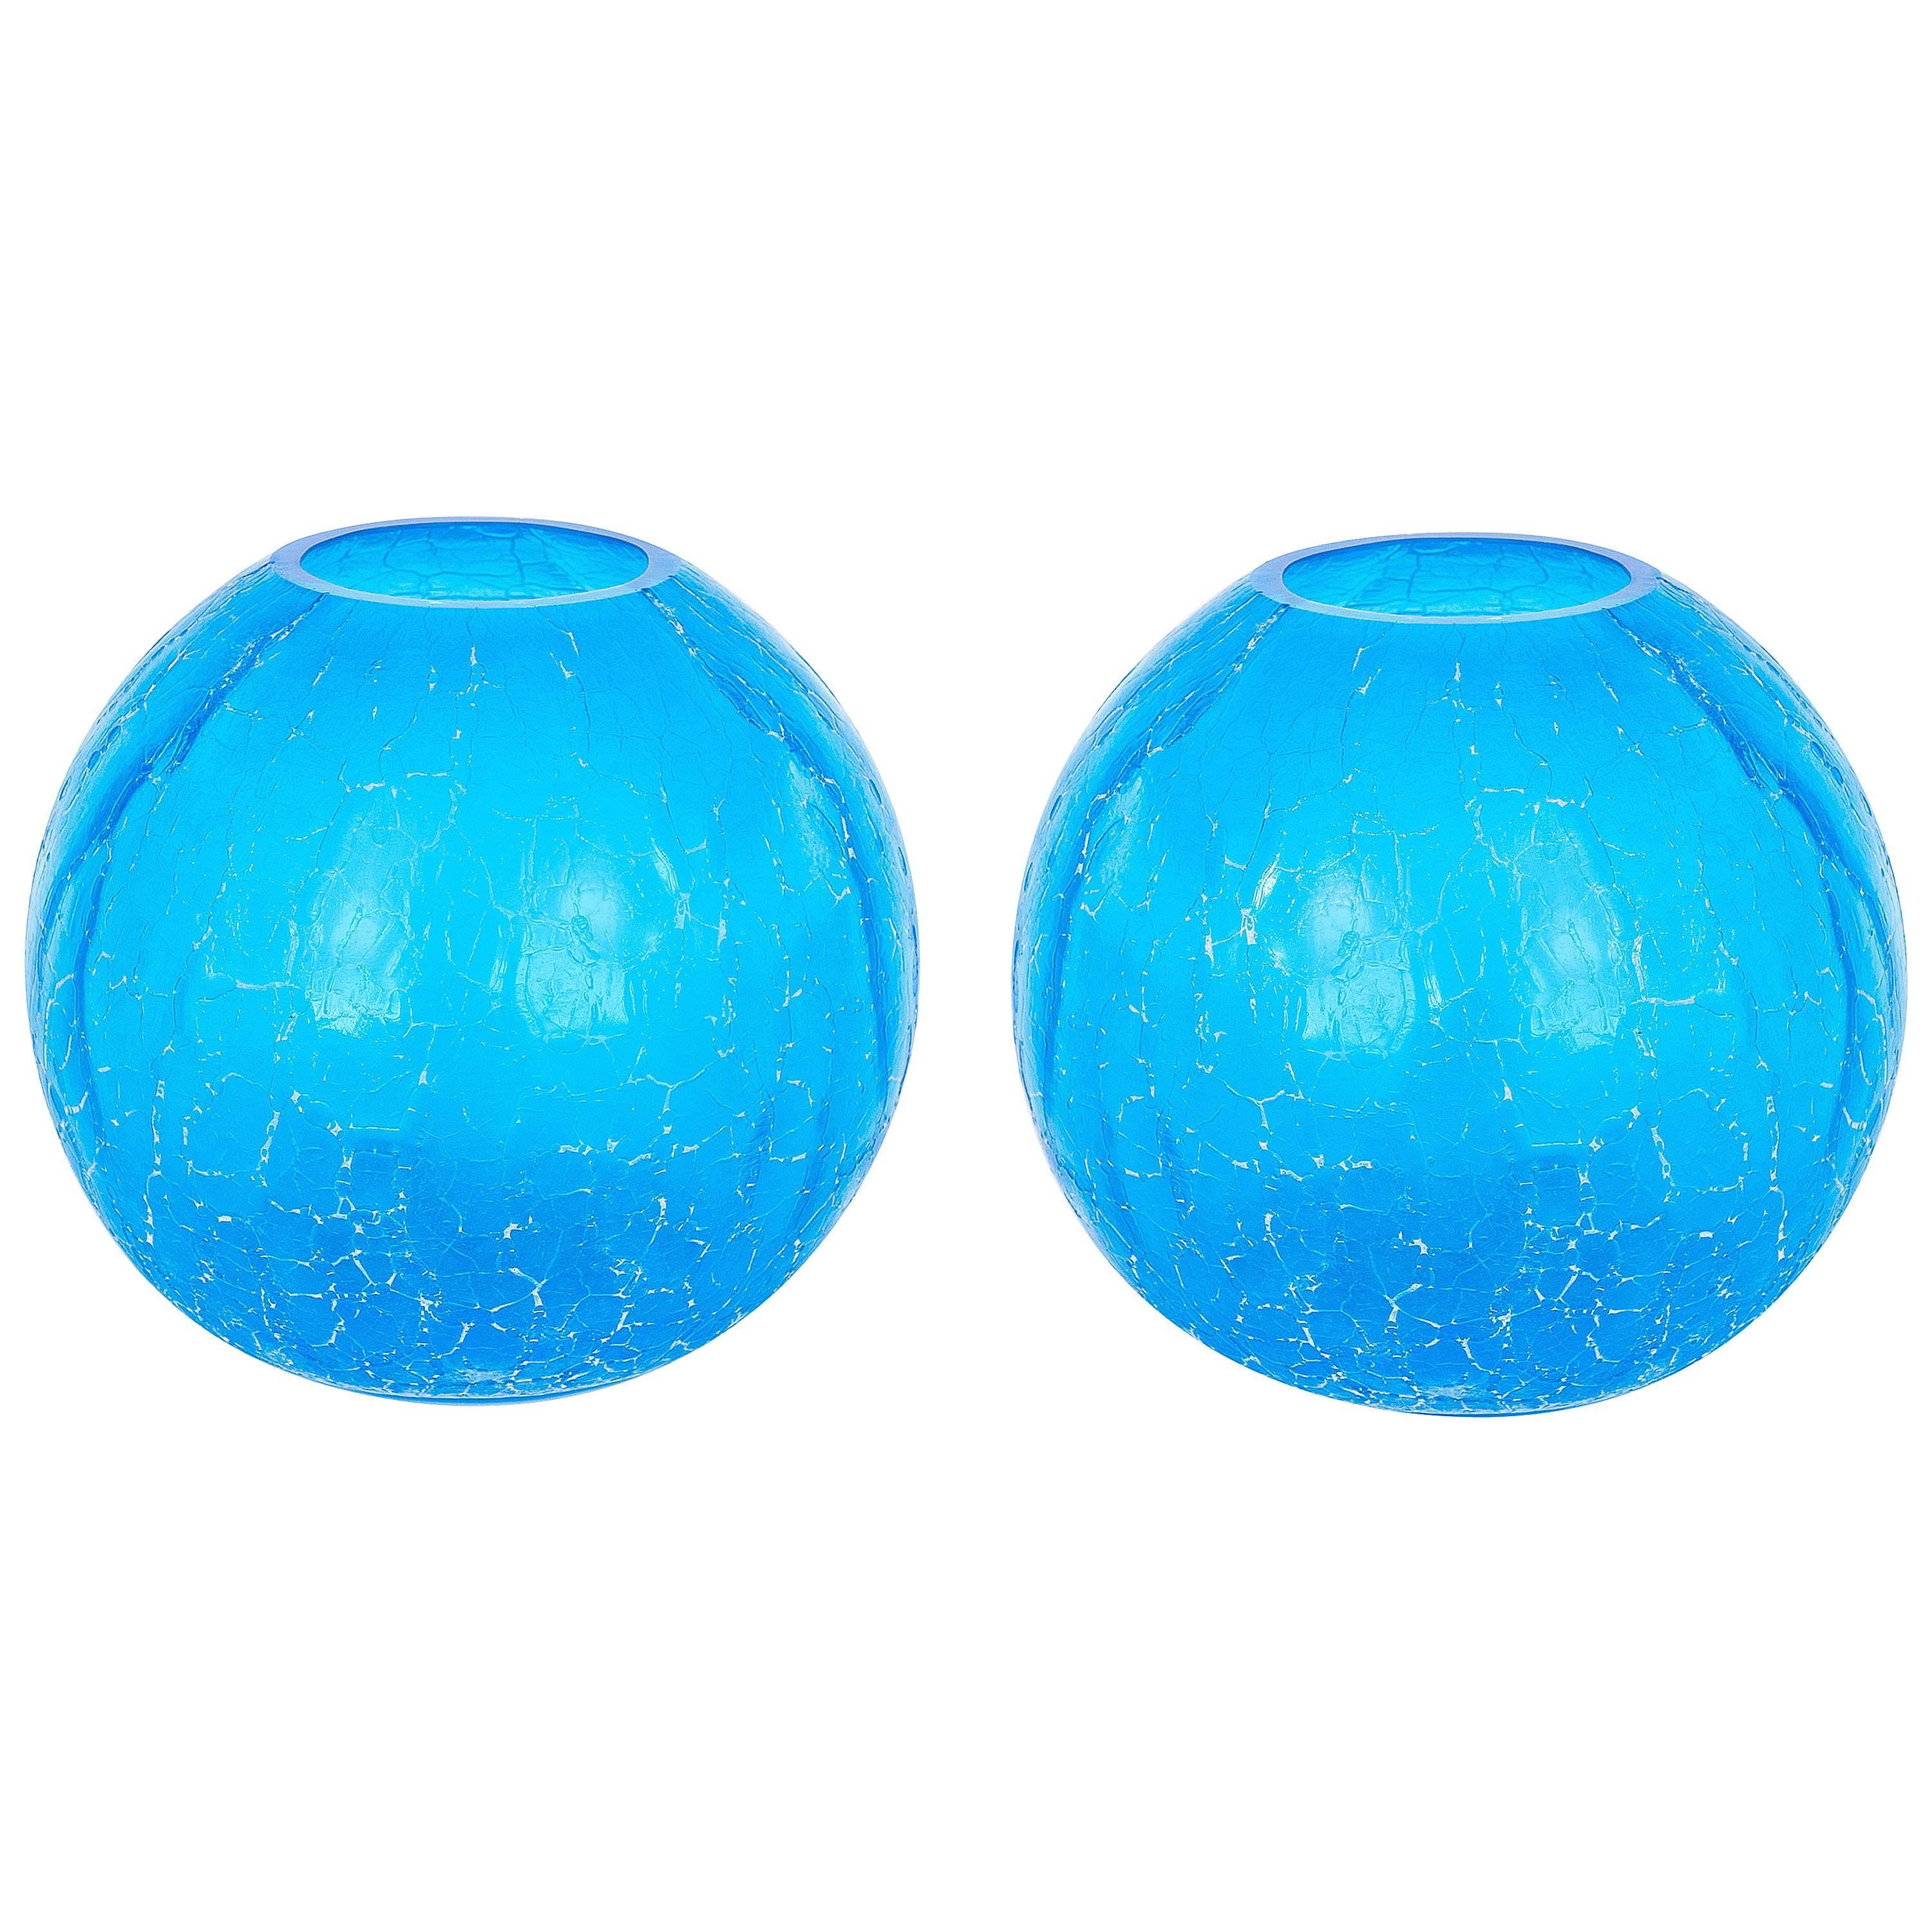 Pair of Sphere Vases in Italian Murano Blown Glass by Cenedese 1970s Italy